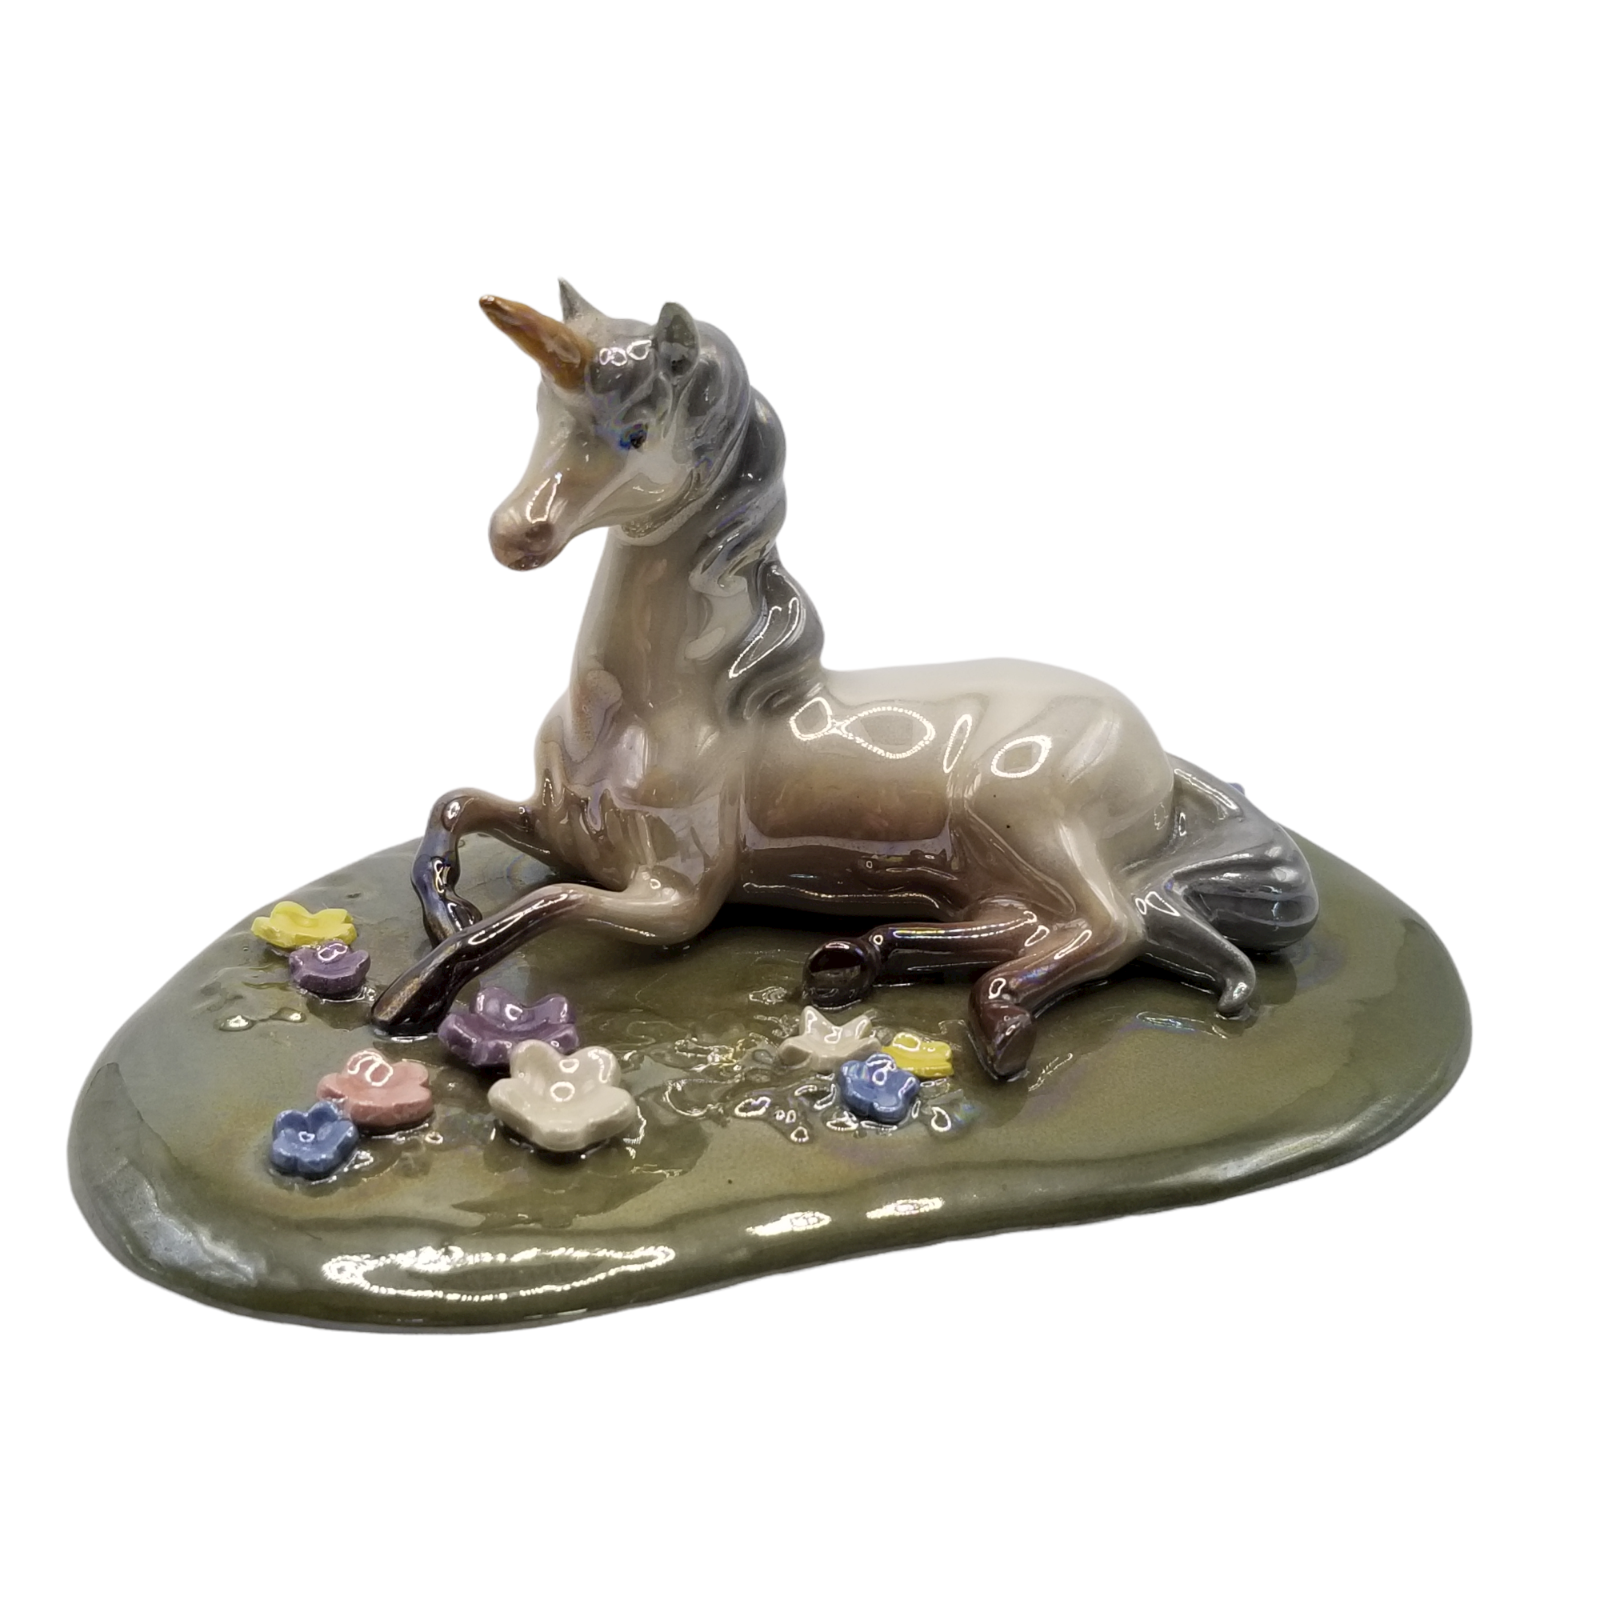 Primary image for Hagen-Renaker UNICORN Figurine RETIRED #3040 Ceramic Horse with Horn Laying Down